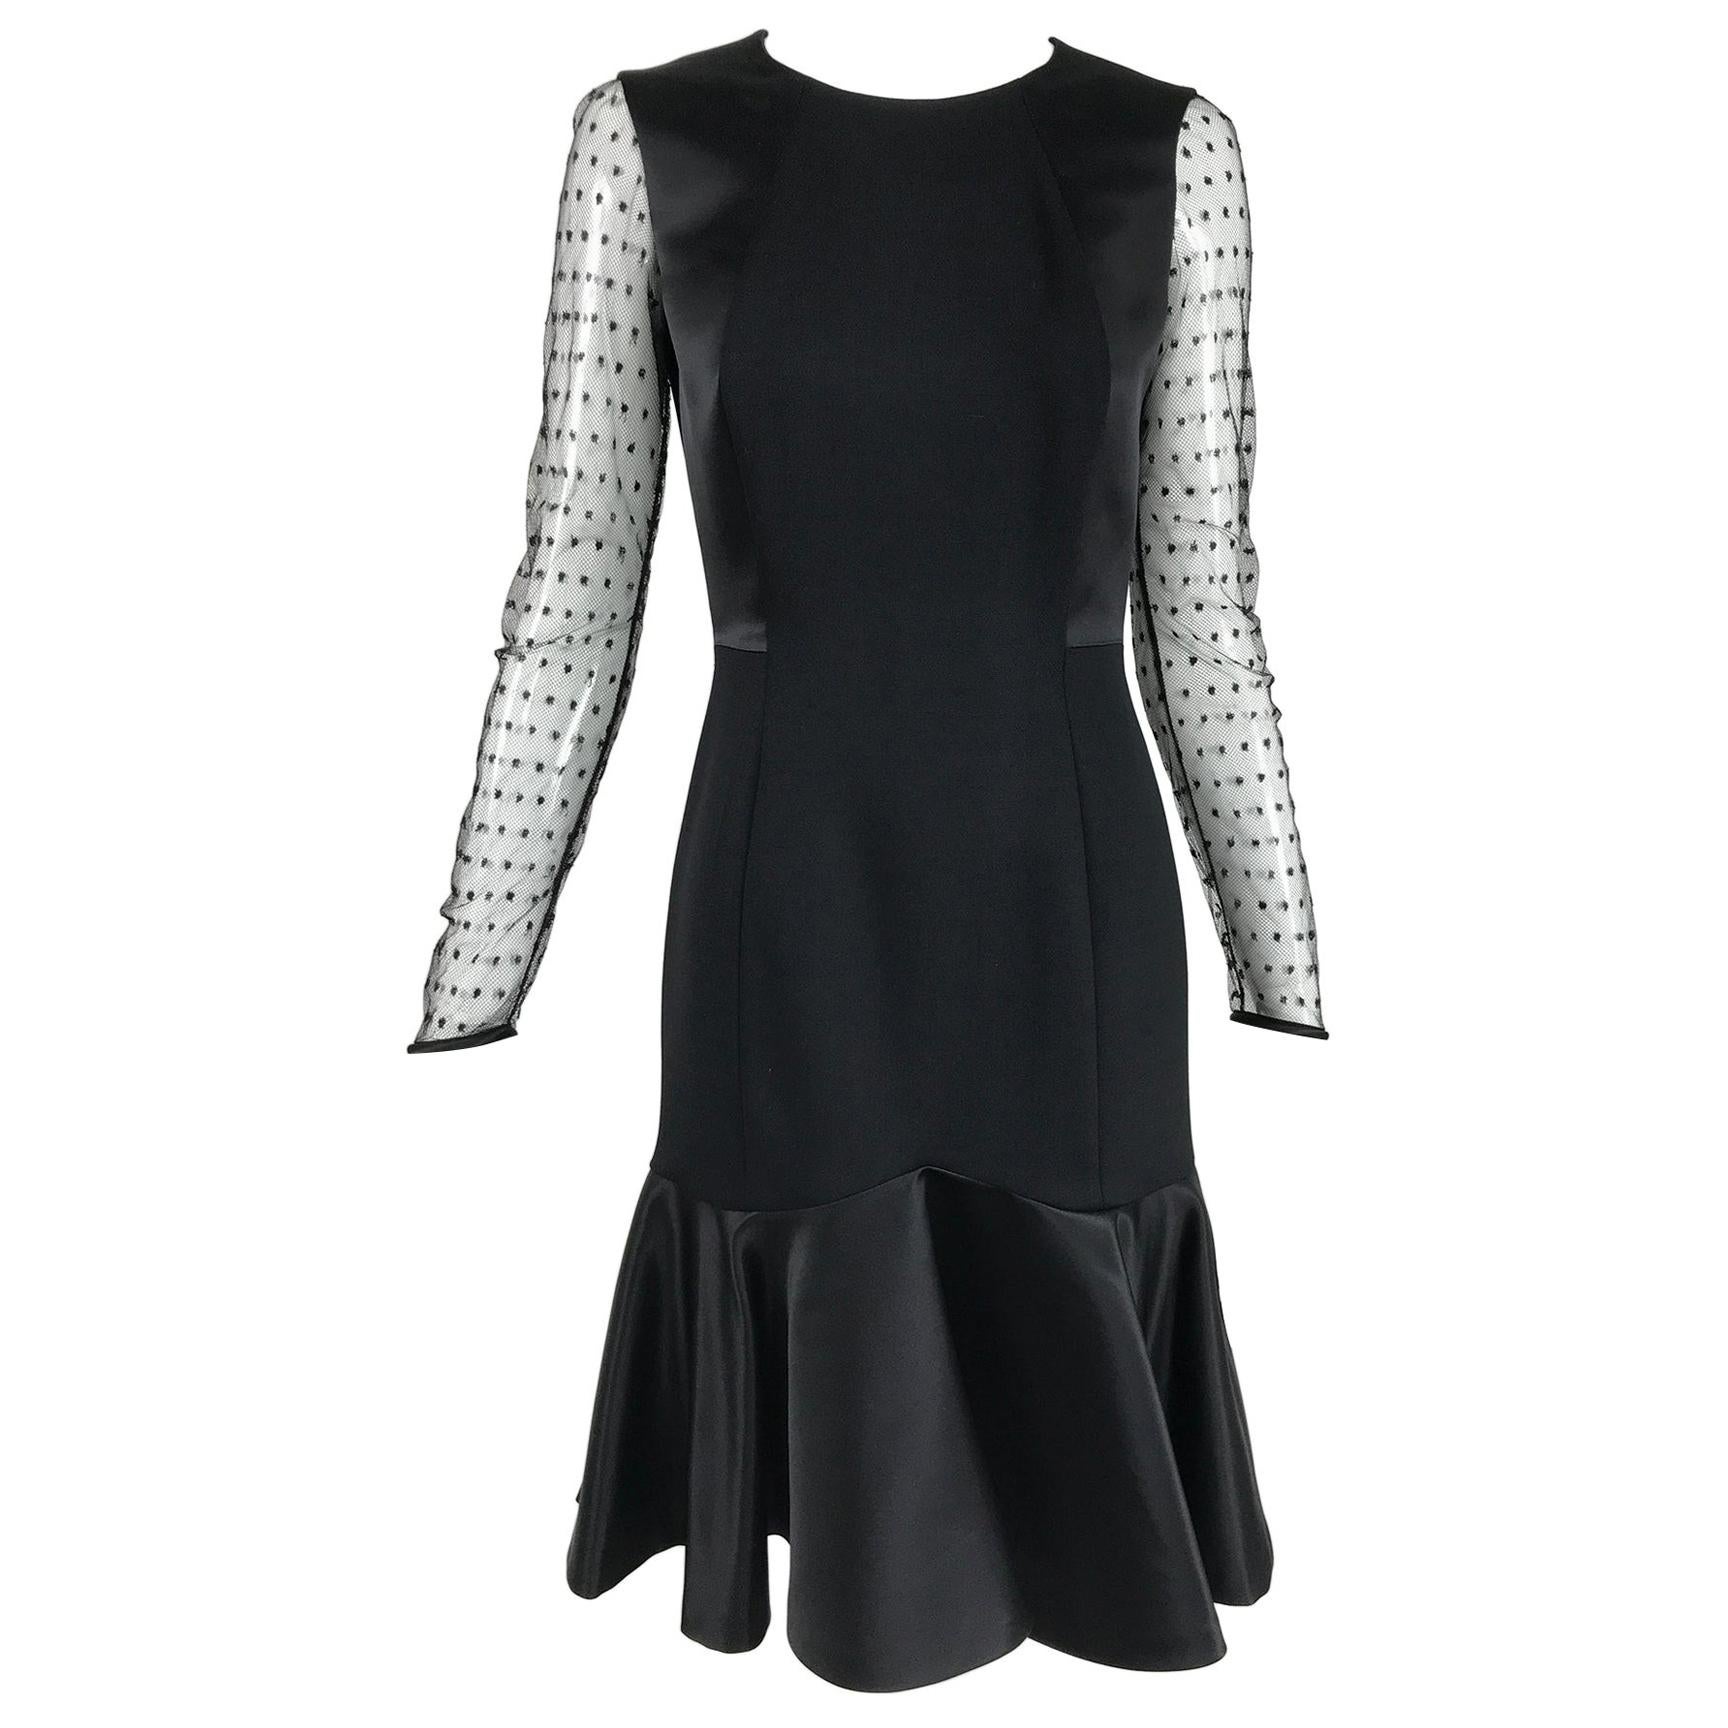 Etro Black Cocktail Dress with Dotted Tulle Sleeves and Satin Hem